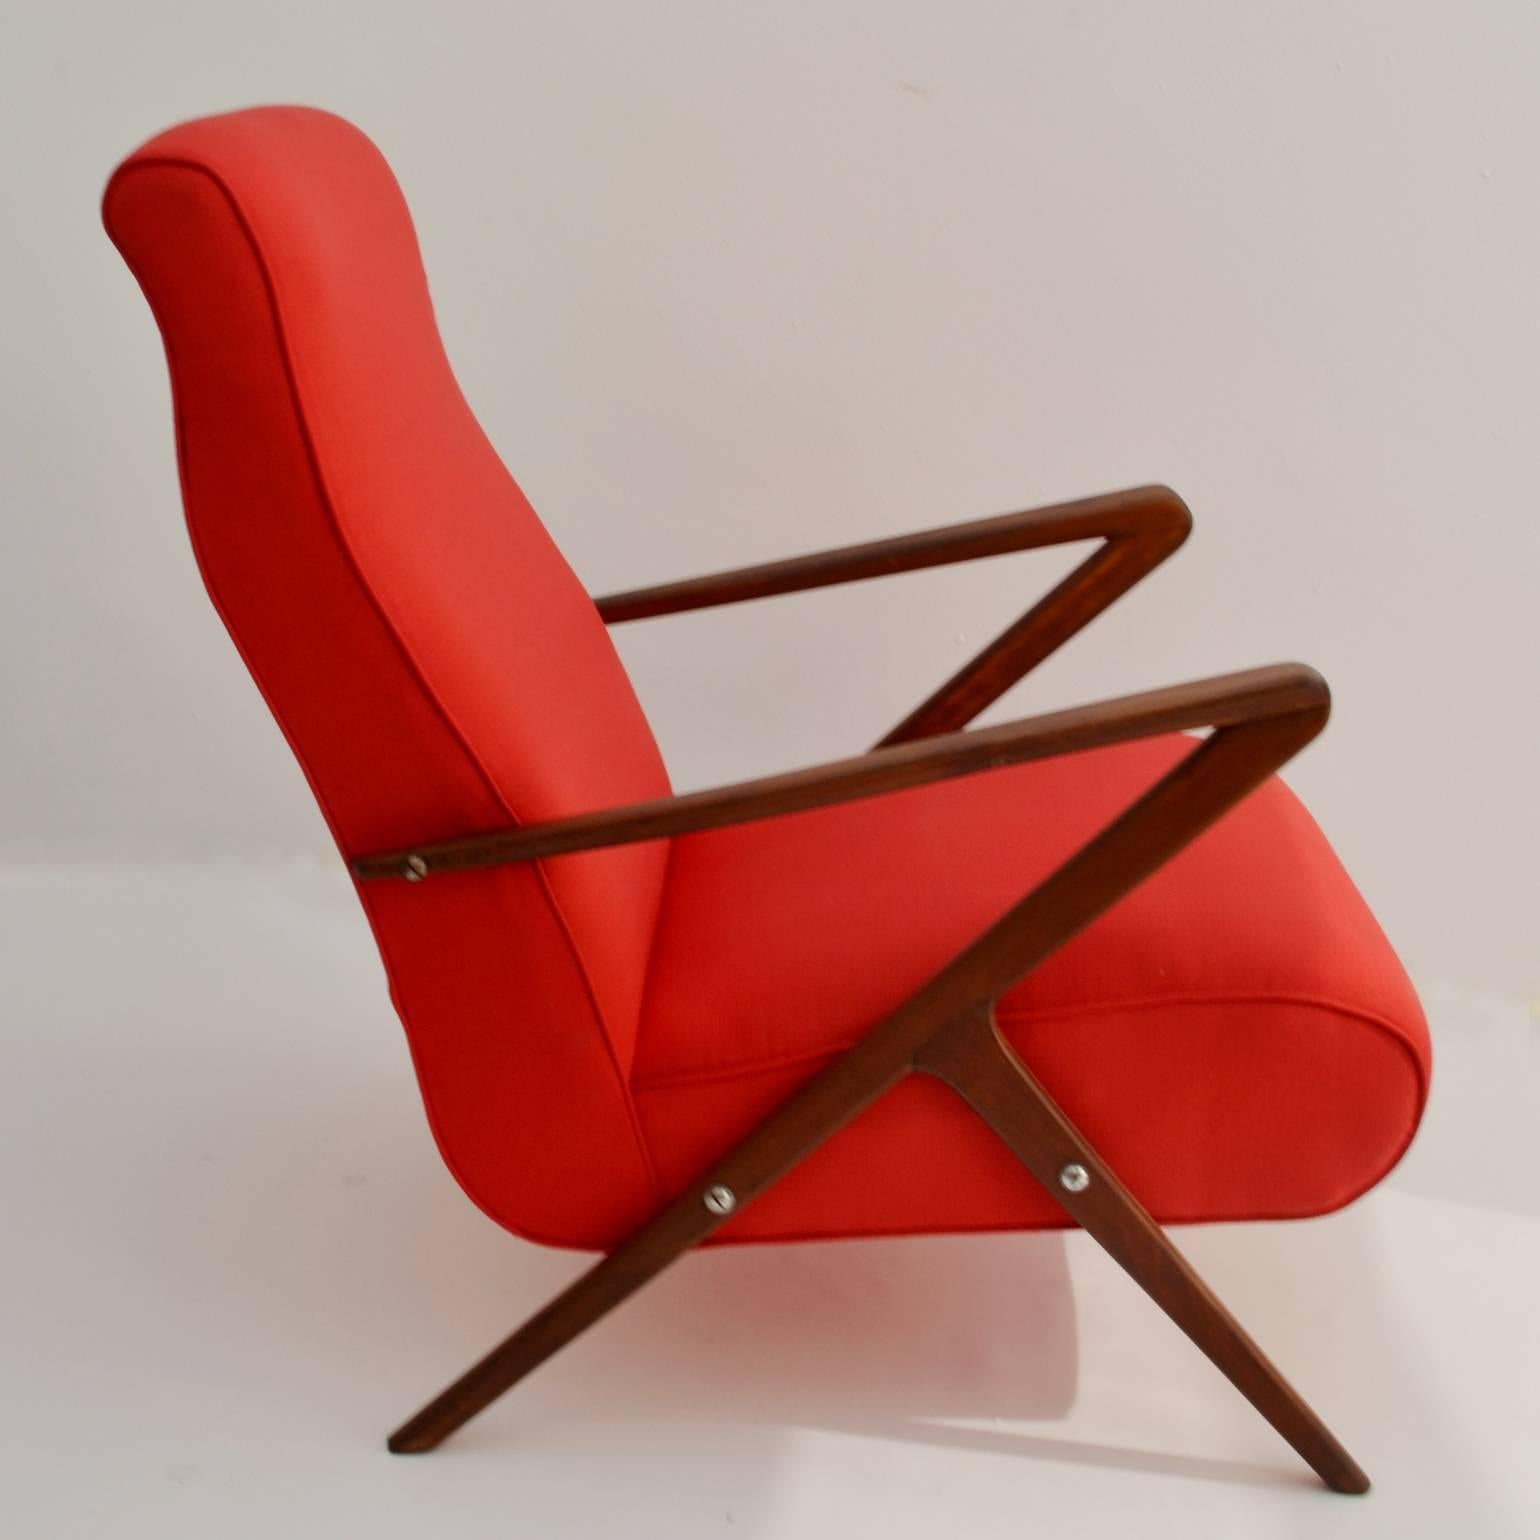 Fabric 1950s Pair of Red Italian Lounge Chairs, Mahogany Frame with Pronounced Armrests